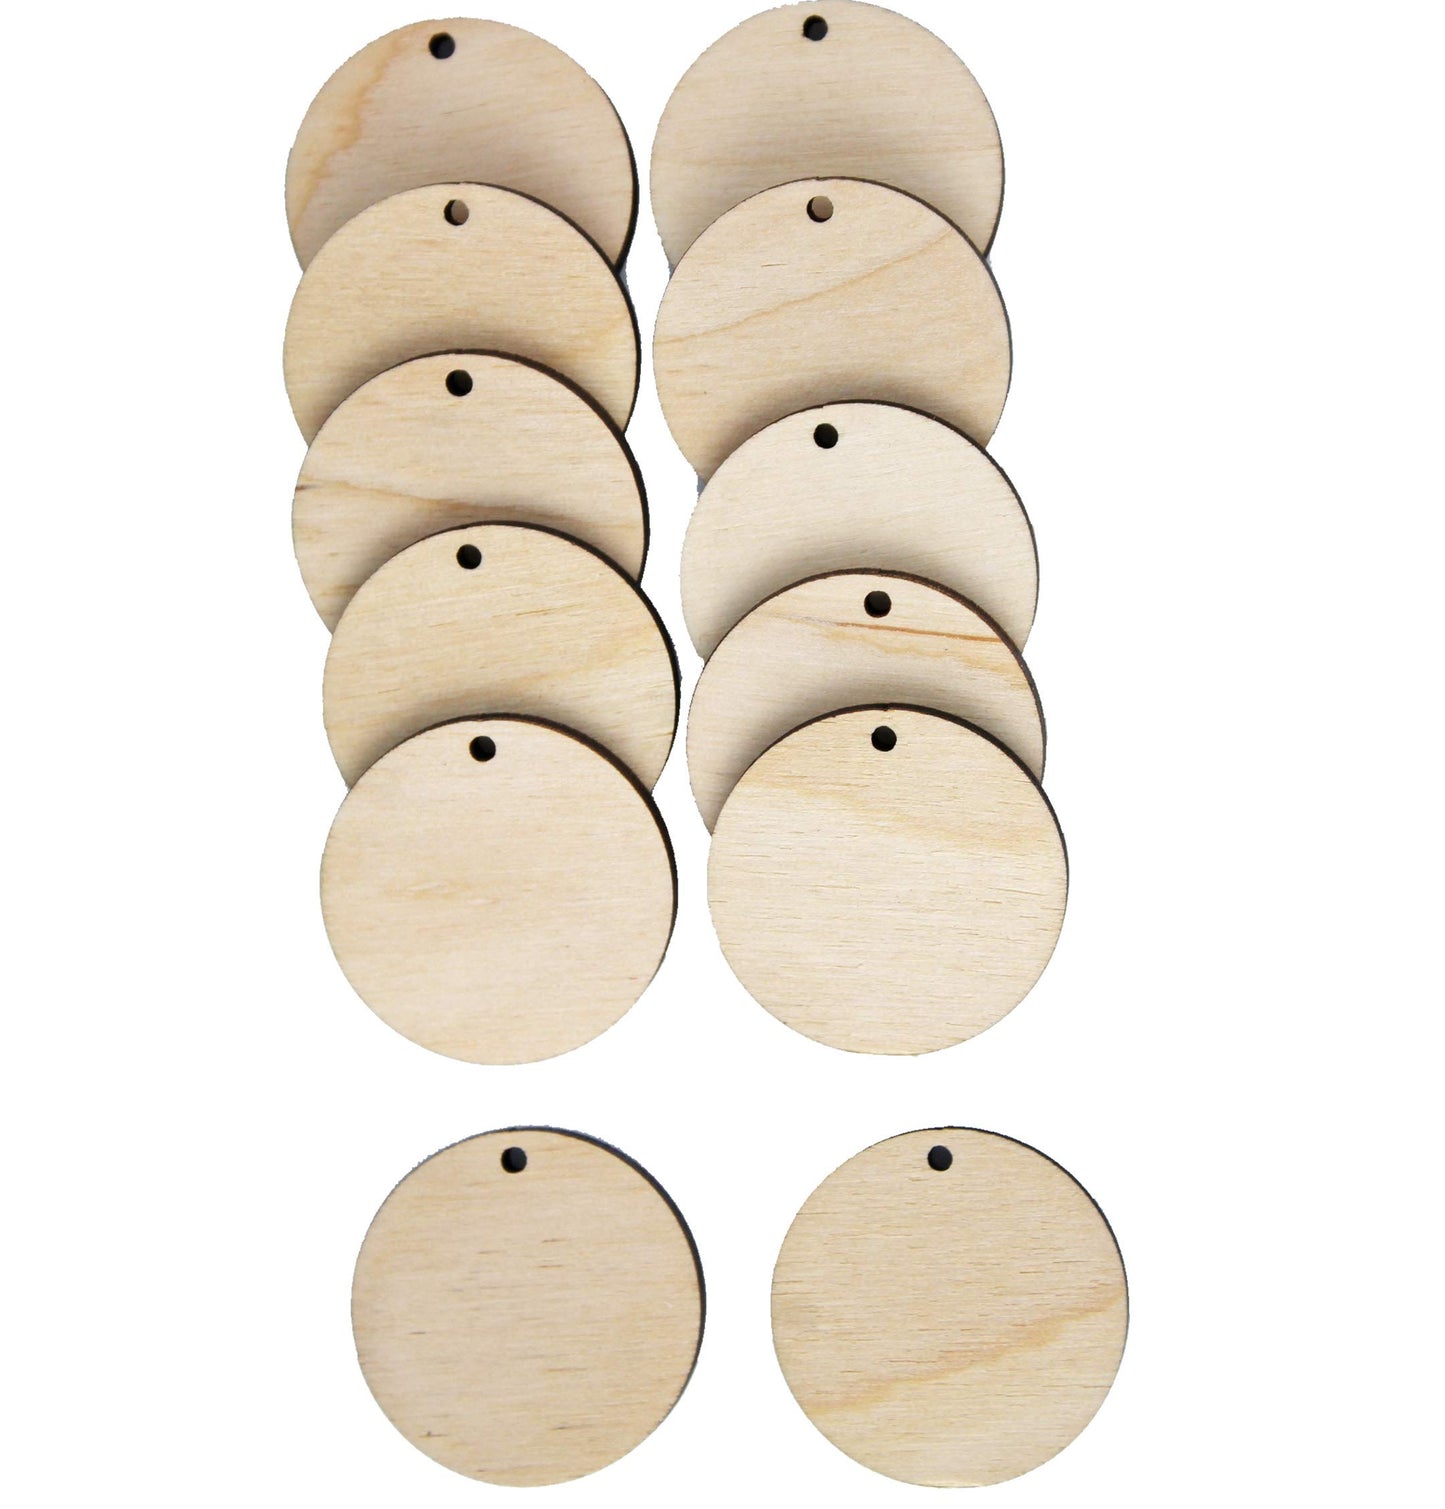 ALL SIZES BULK (12pc to 100pc) Unfinished Wood Laser Cutout Circle Rounds Dangle Earring Jewelry Blanks Shape Crafts Made in Texas